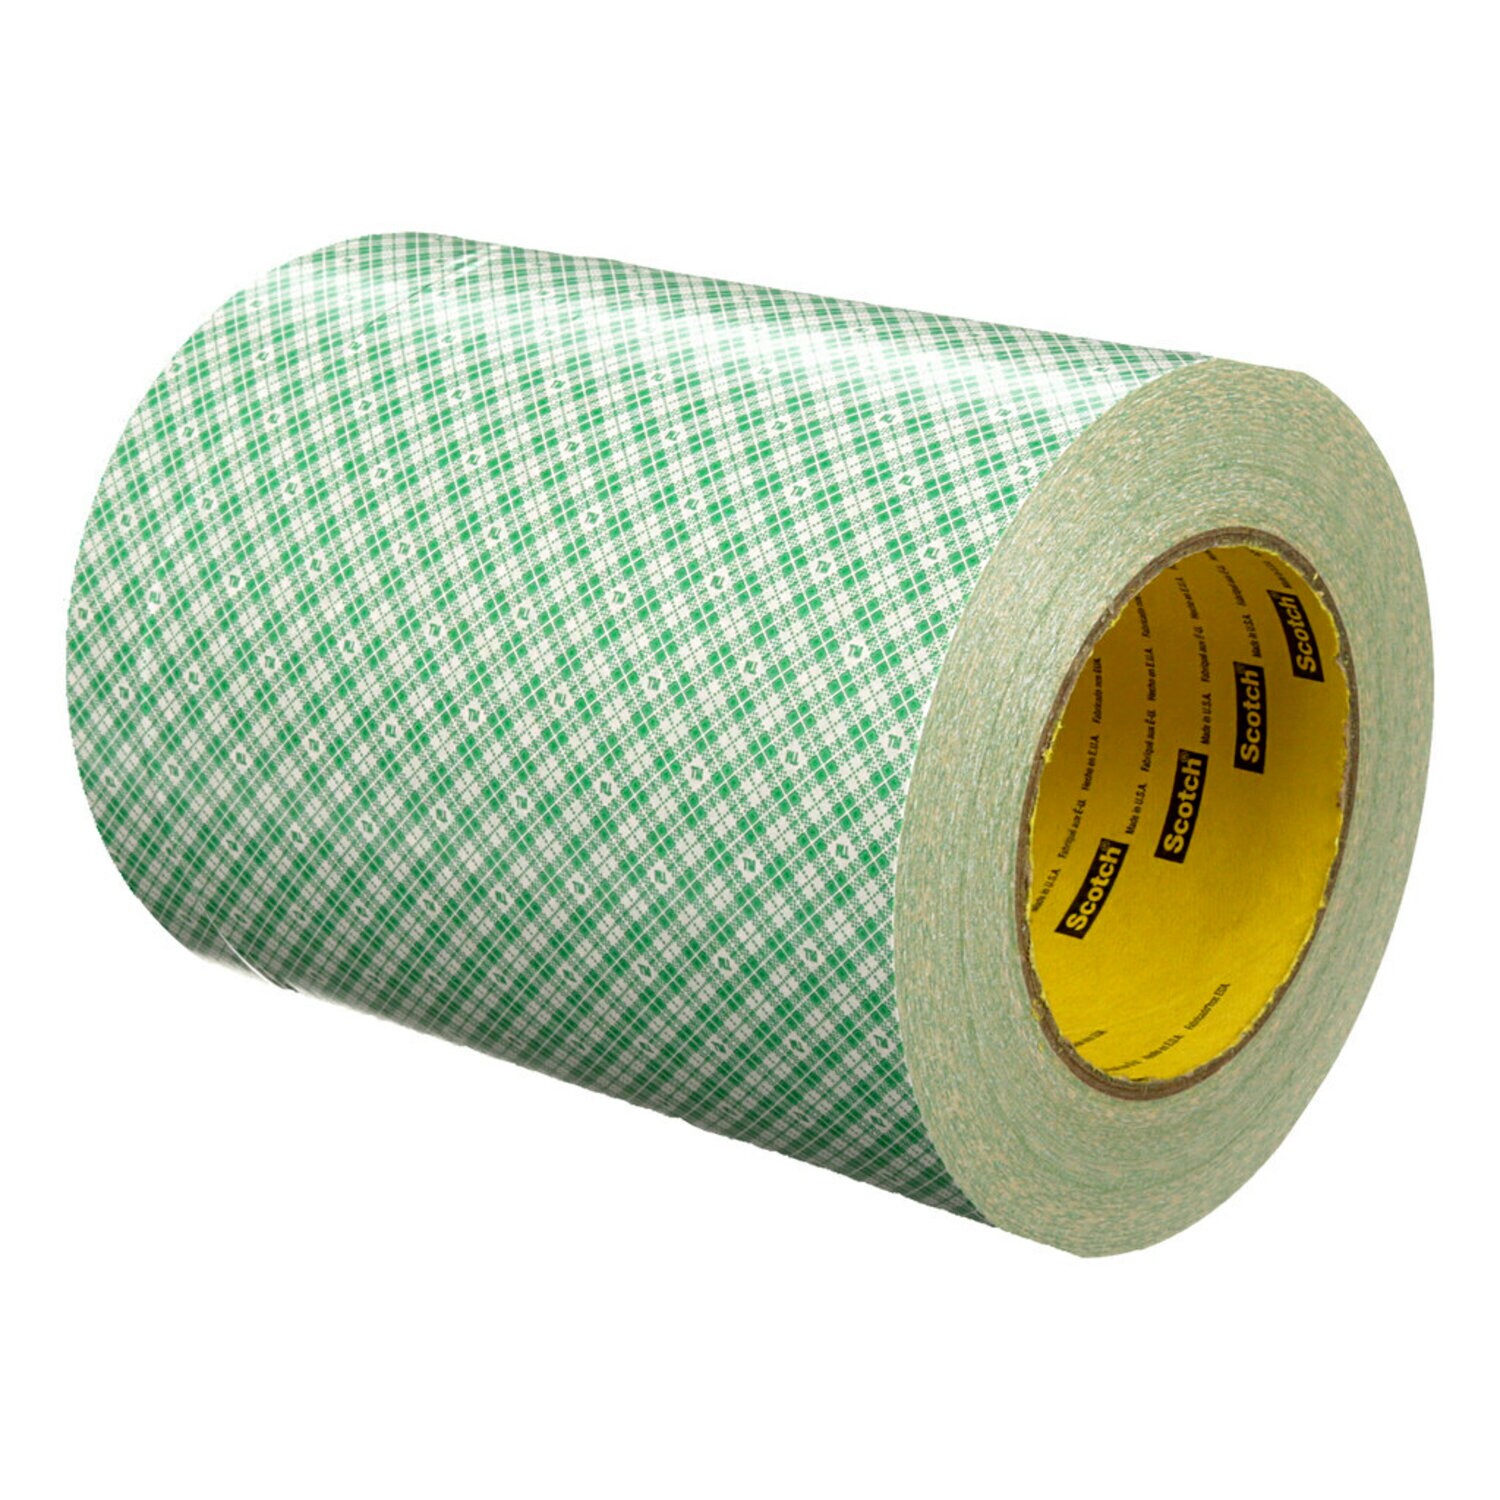 7010335488 - 3M Double Coated Paper Tape 410M, Natural, 6 in x 36 yd, 5 mil, 8 rolls
per case